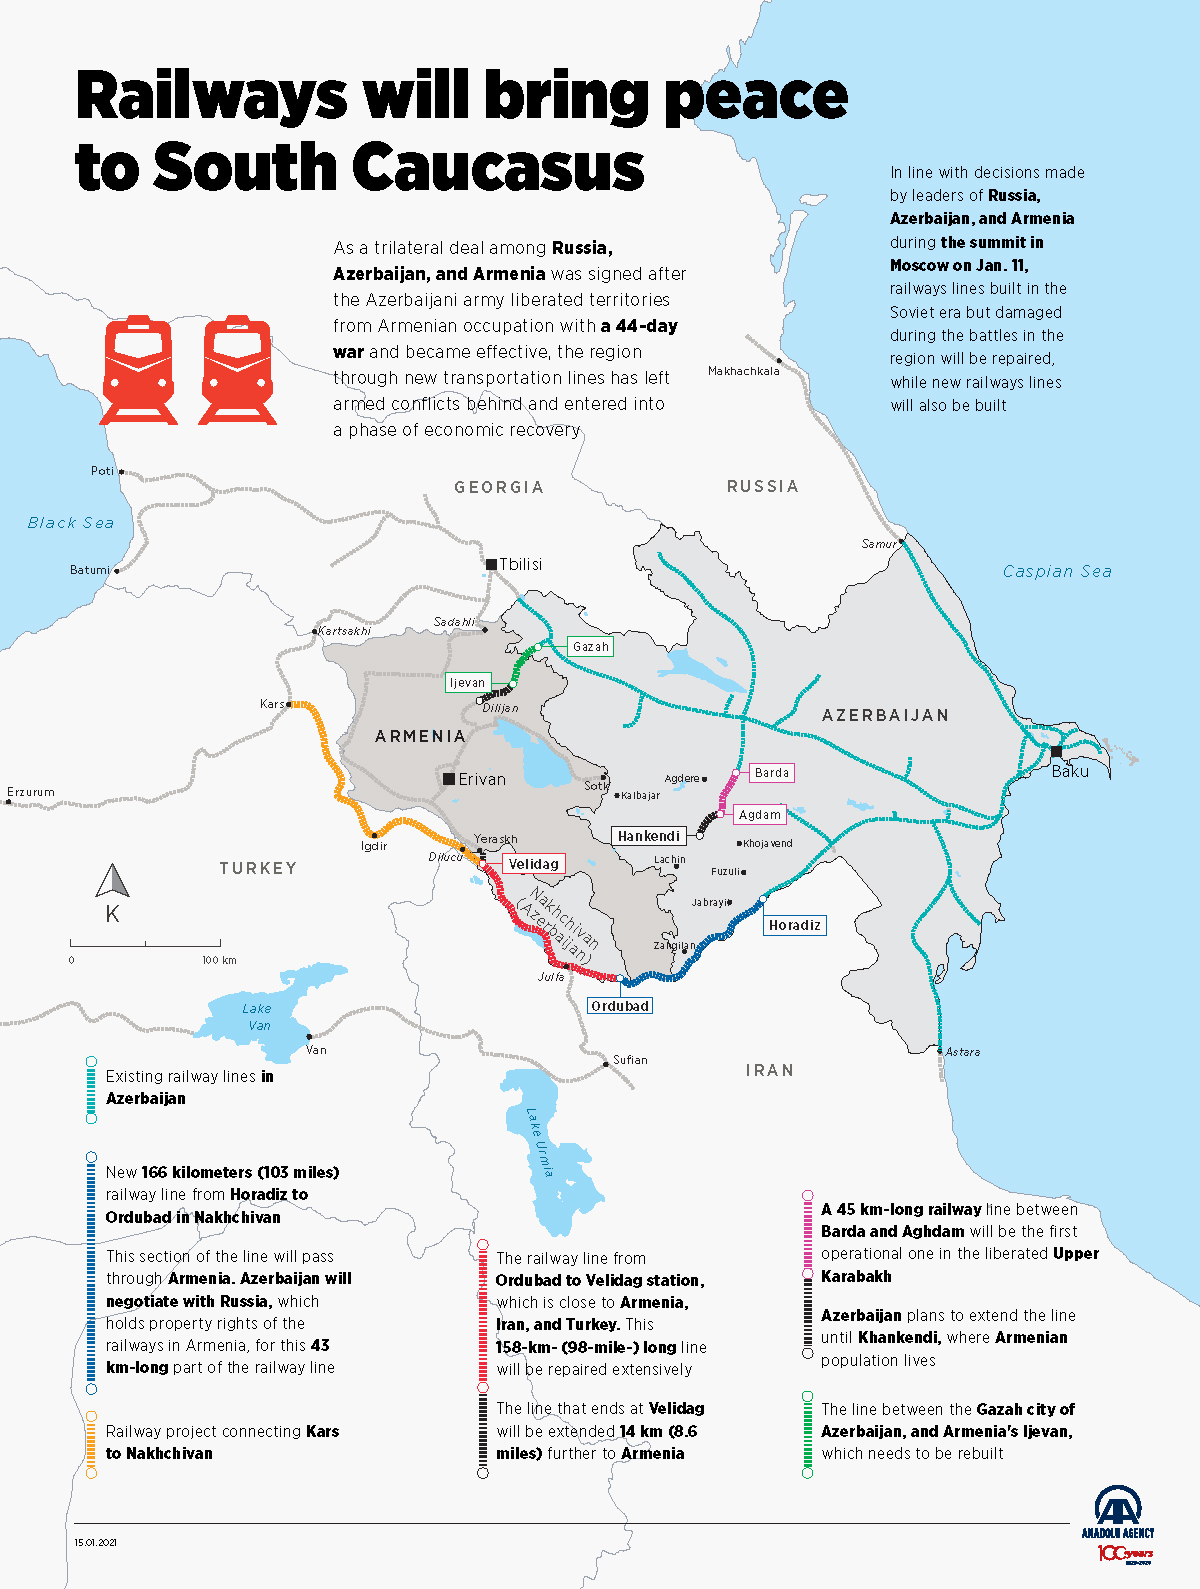 Railways will bring peace to South Caucasus